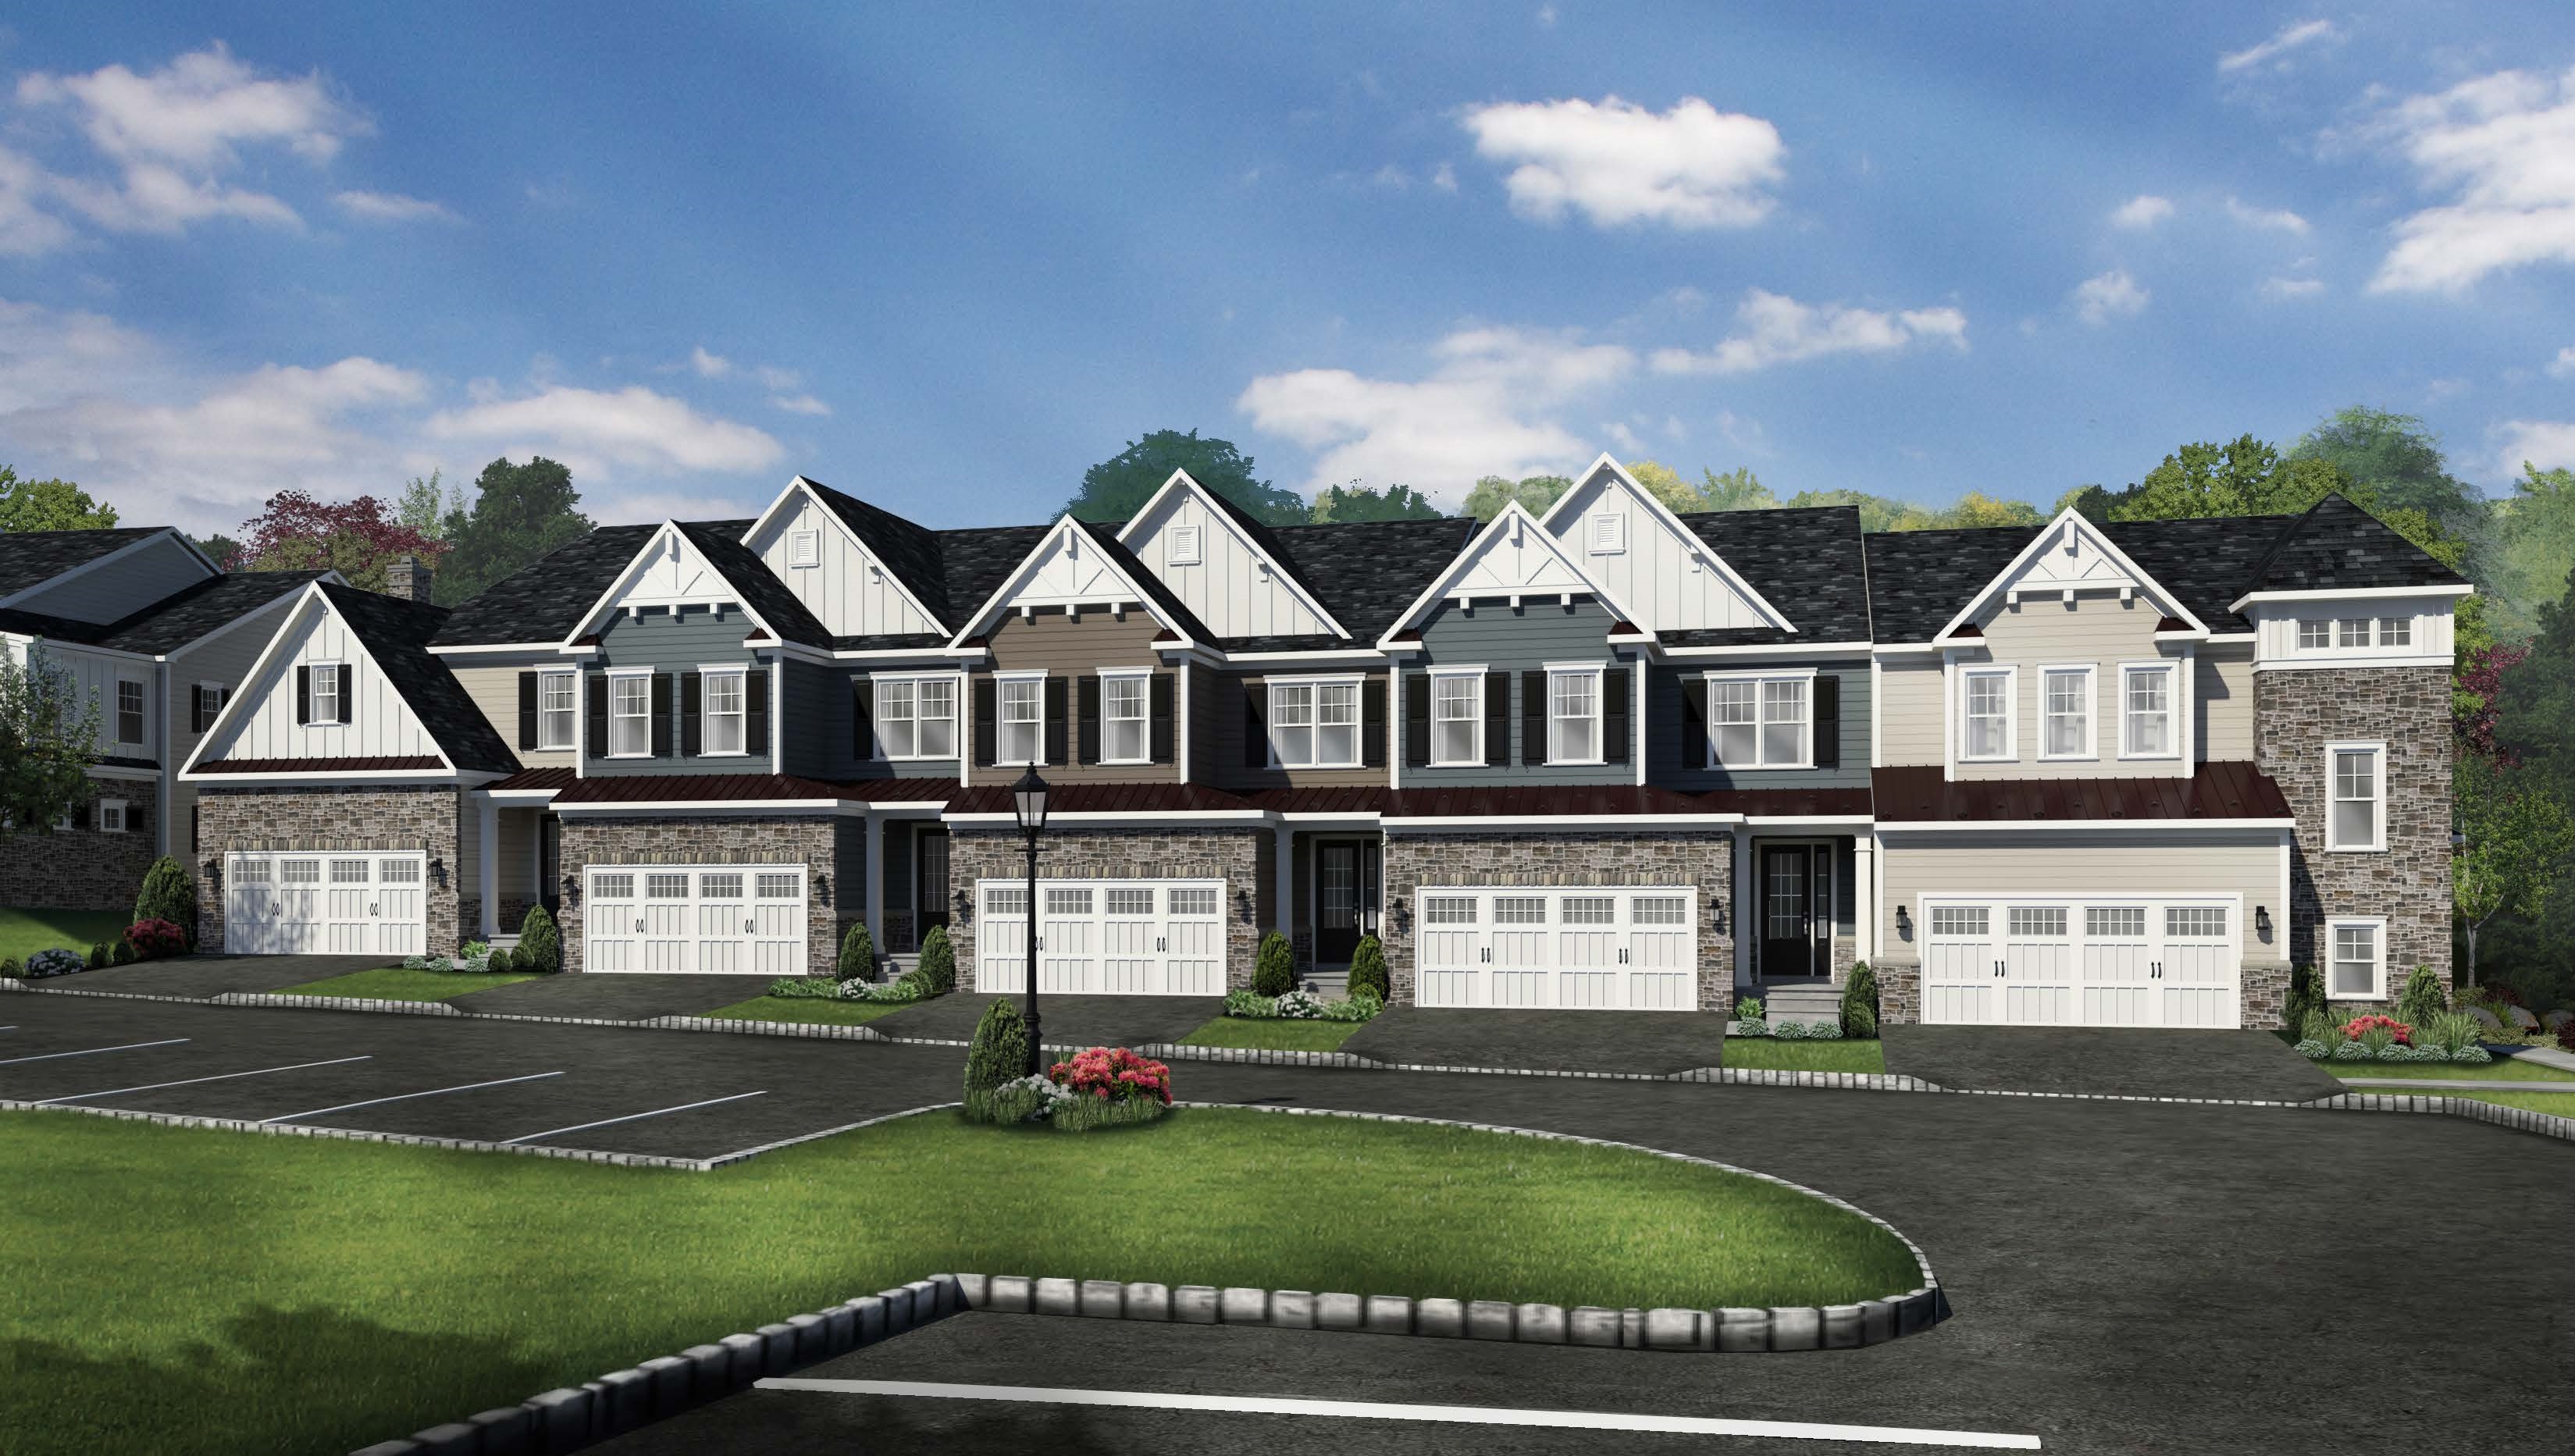 Build Your Dream Home in Overlook at Gwynedd | W.B. Homes Inc